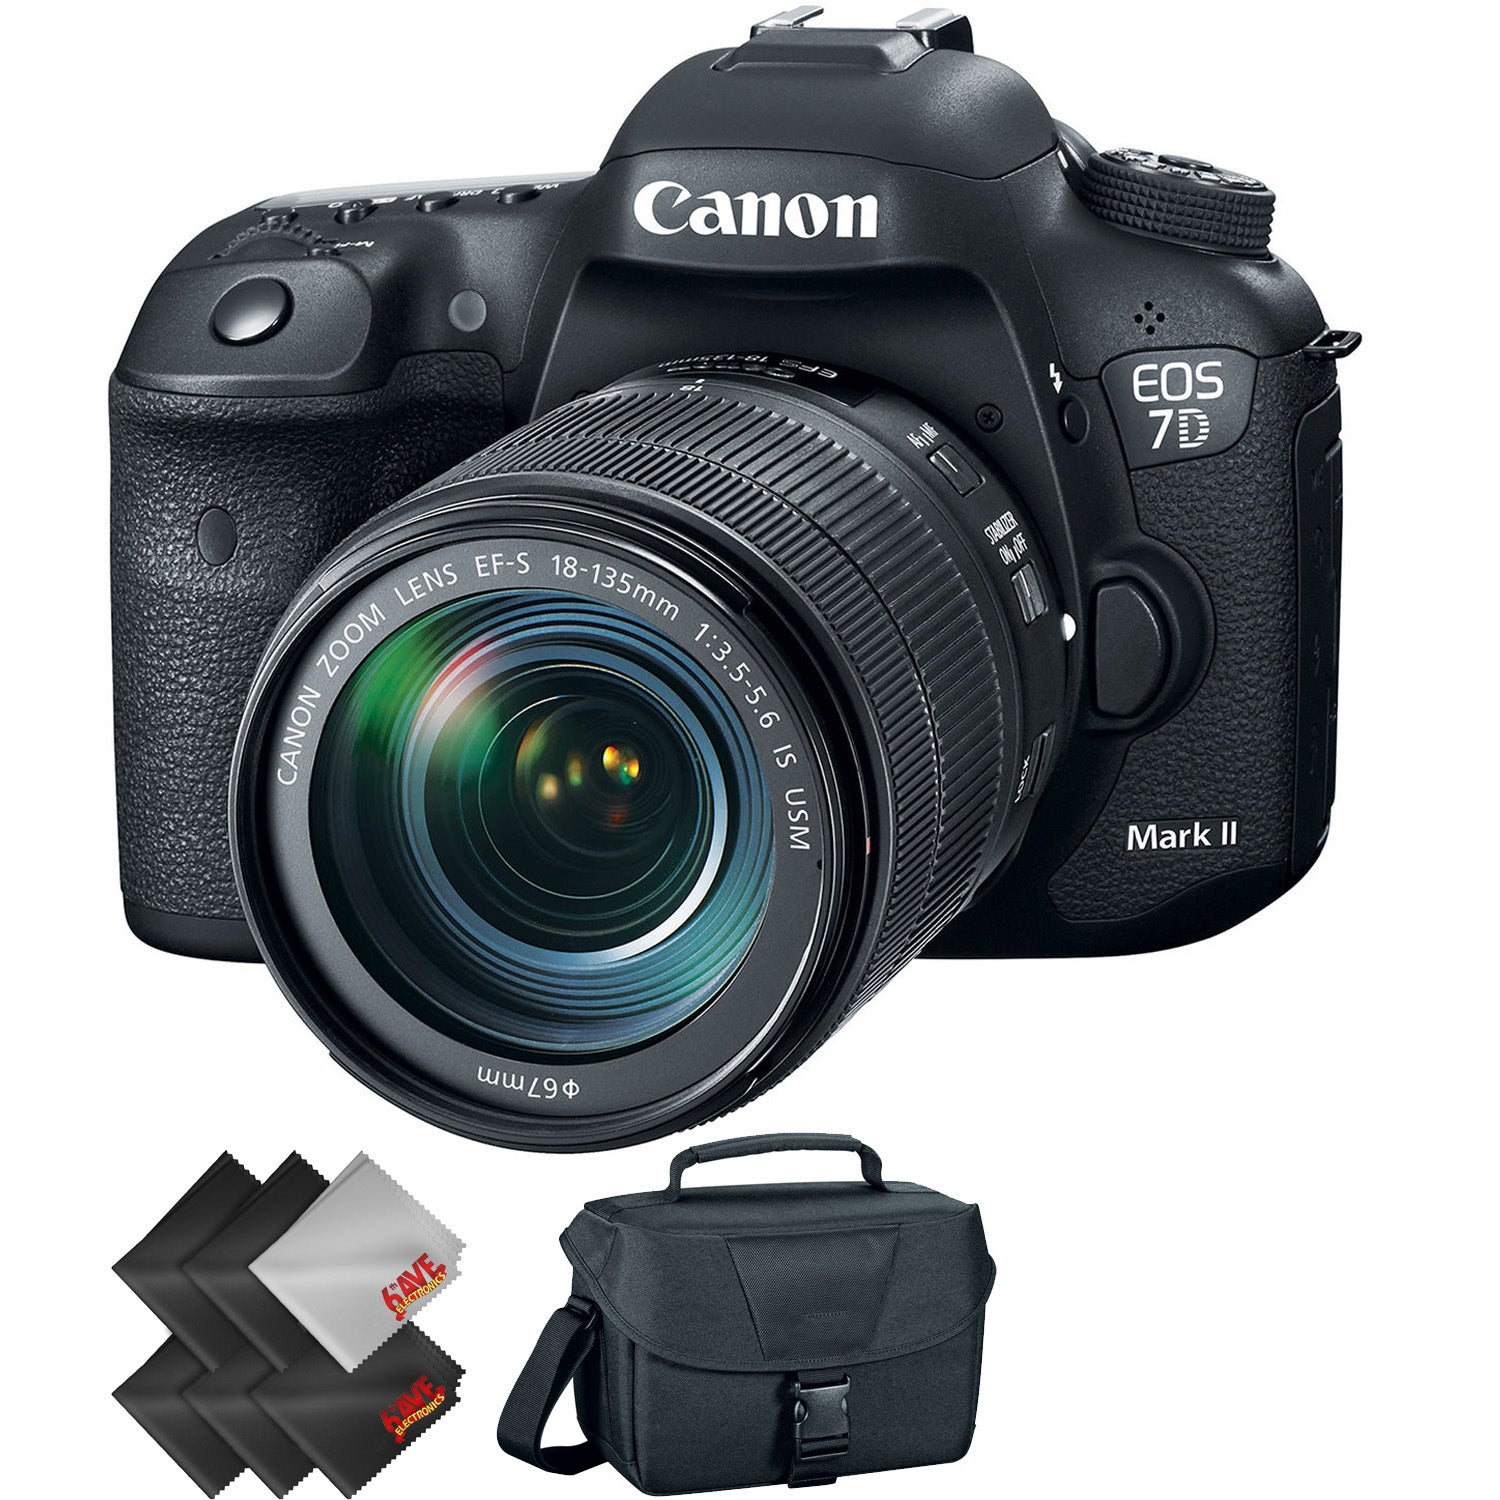 Canon EOS 7D Mark II DSLR Camera with 18-135mm f/3.5-5.6 is USM Lens & W-E1 Wi-Fi Adapter + 2 Year Accidental Warranty